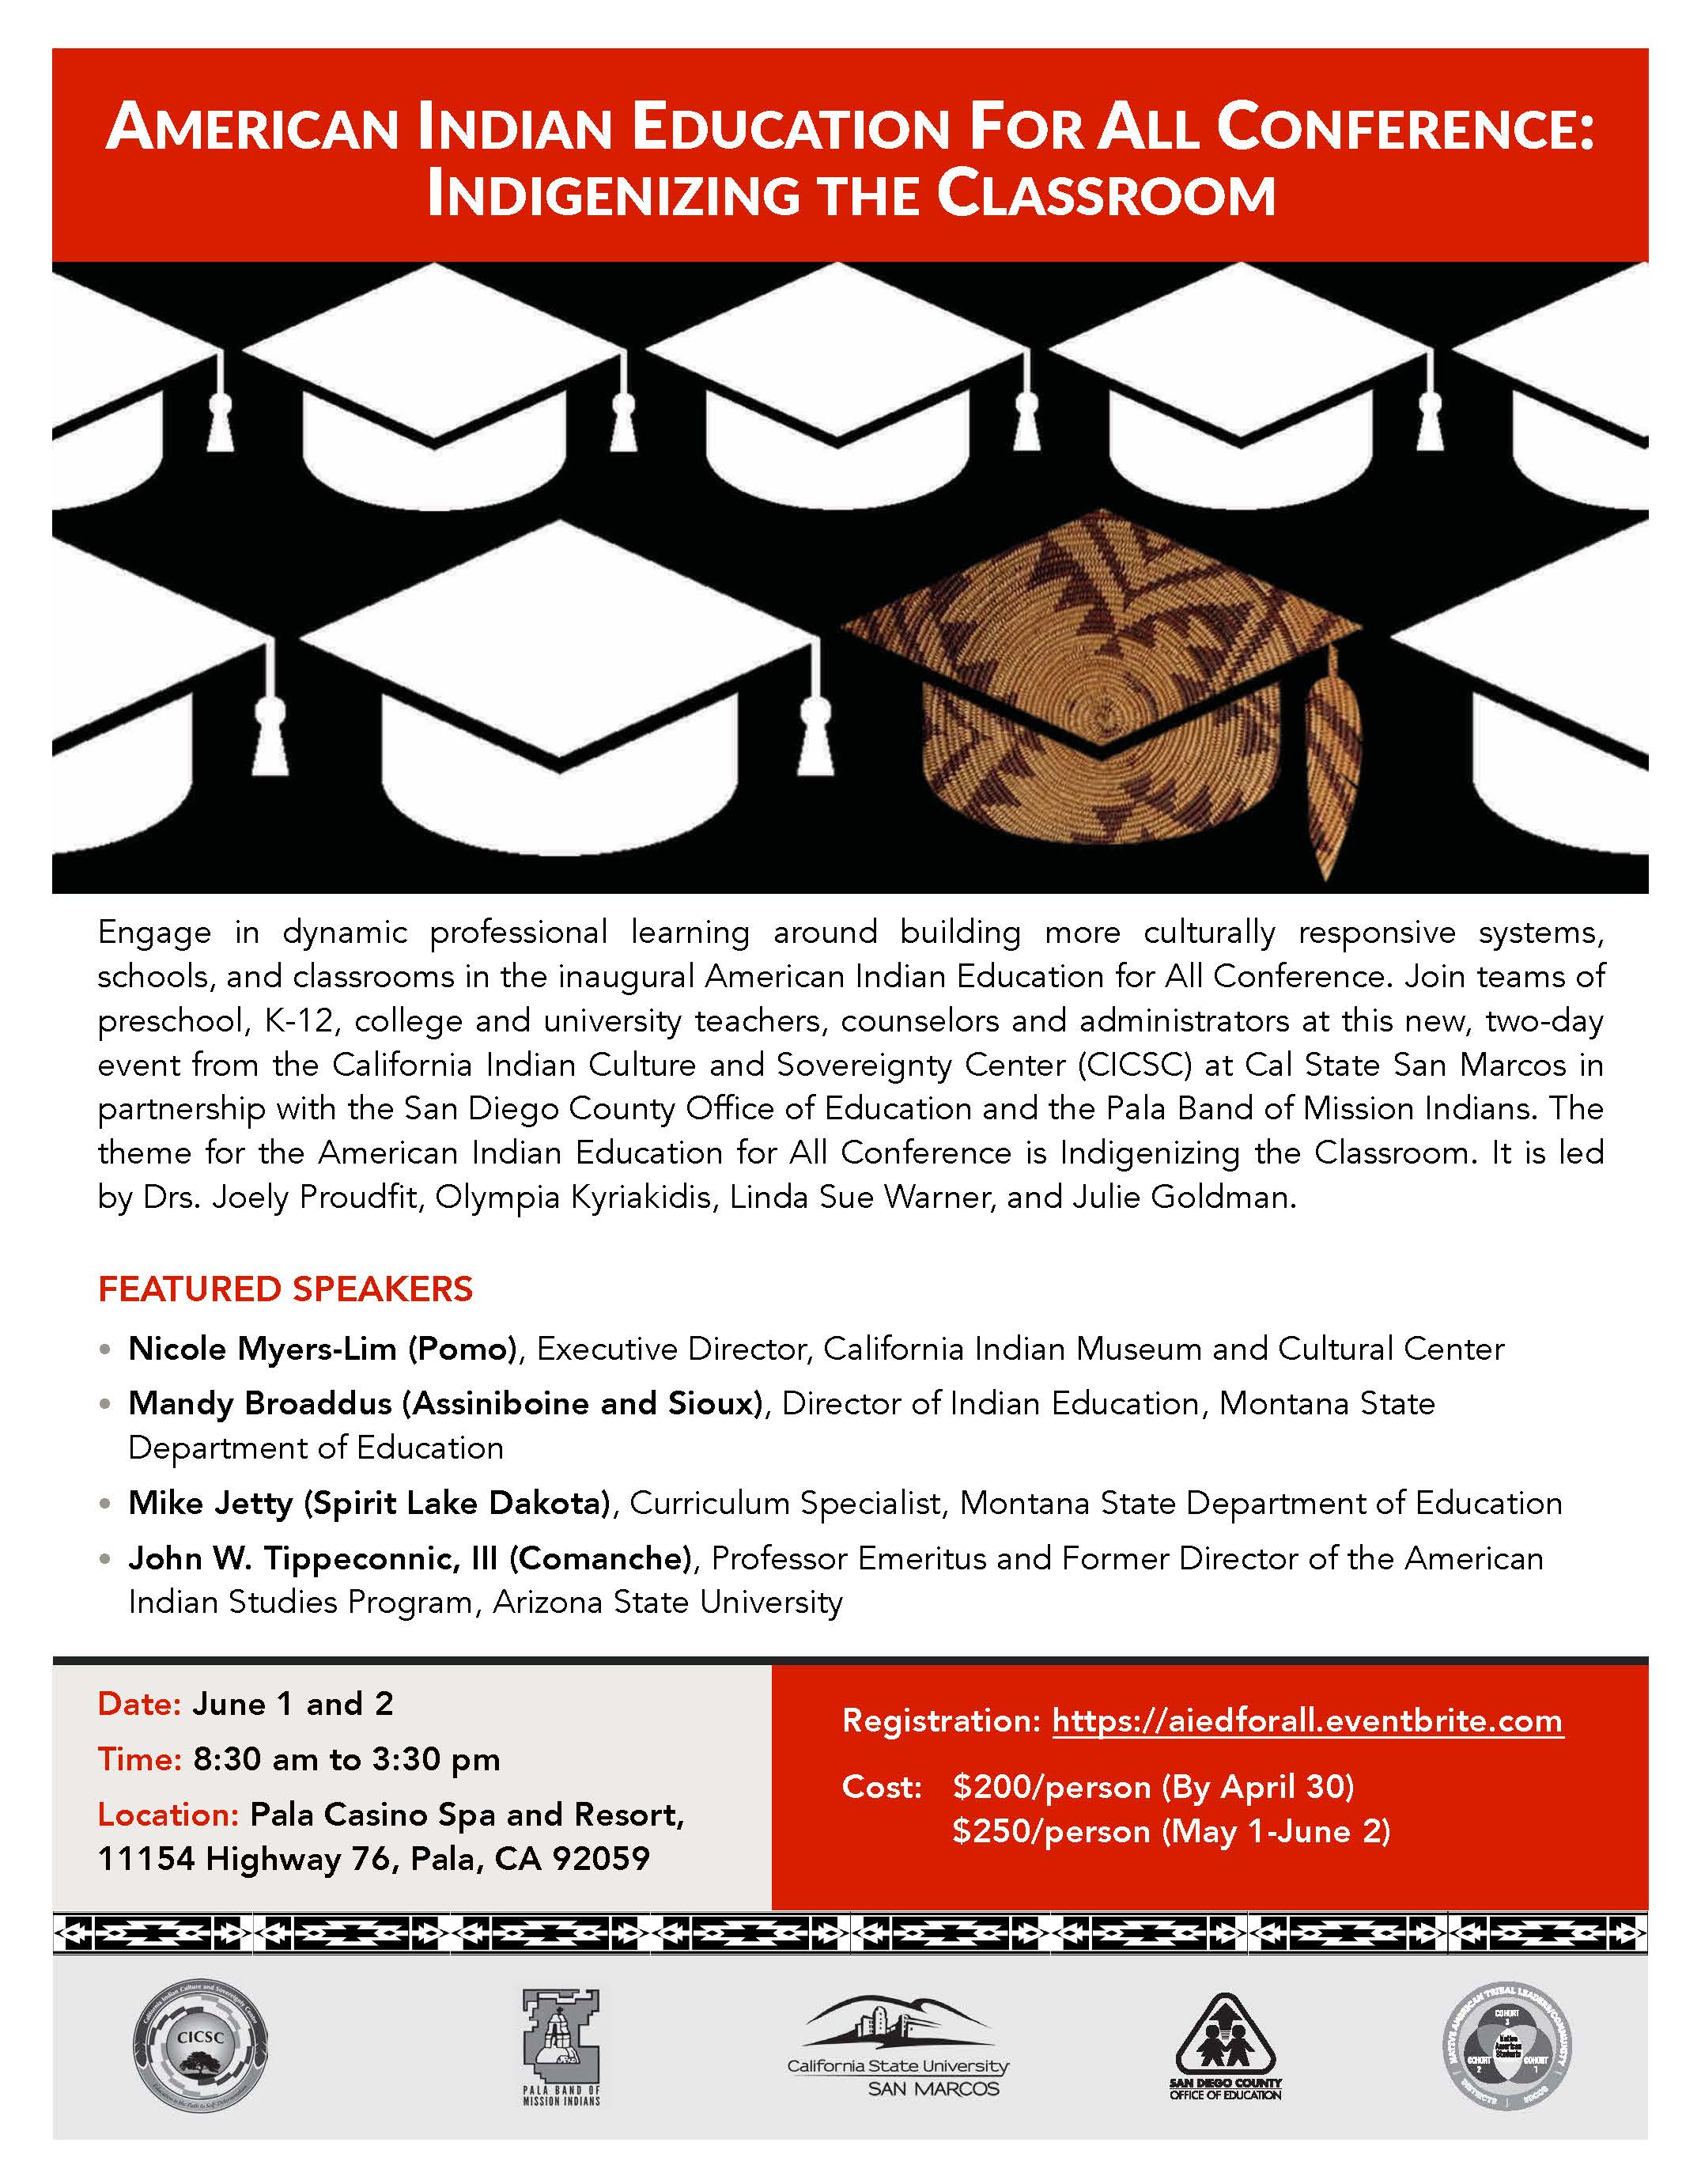 American Indian Education For All Conference Flyer